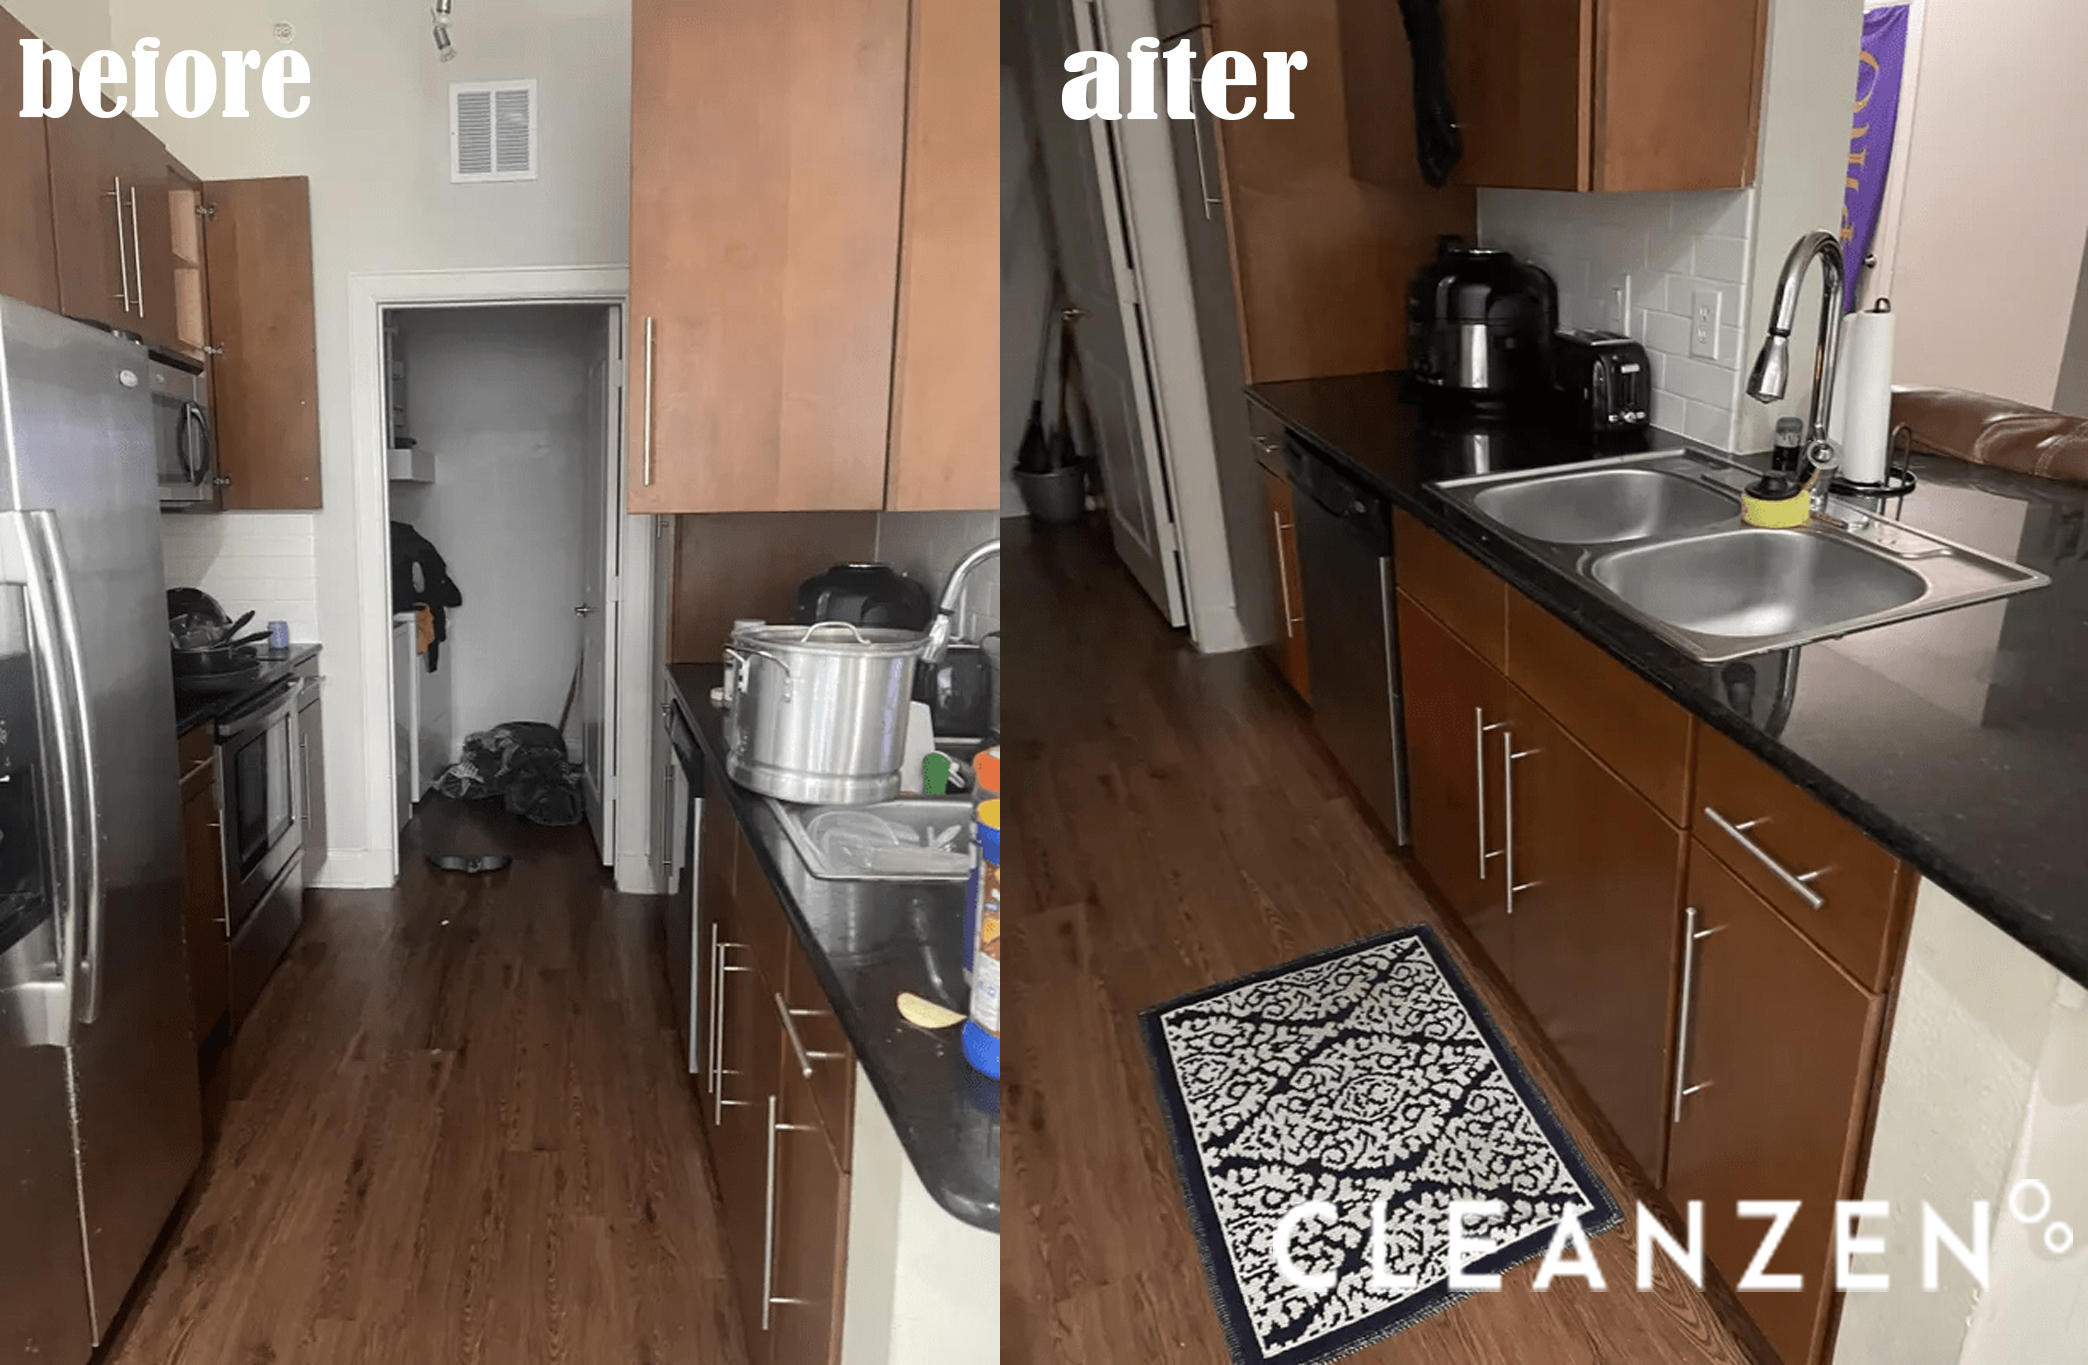 House Cleaners Denver